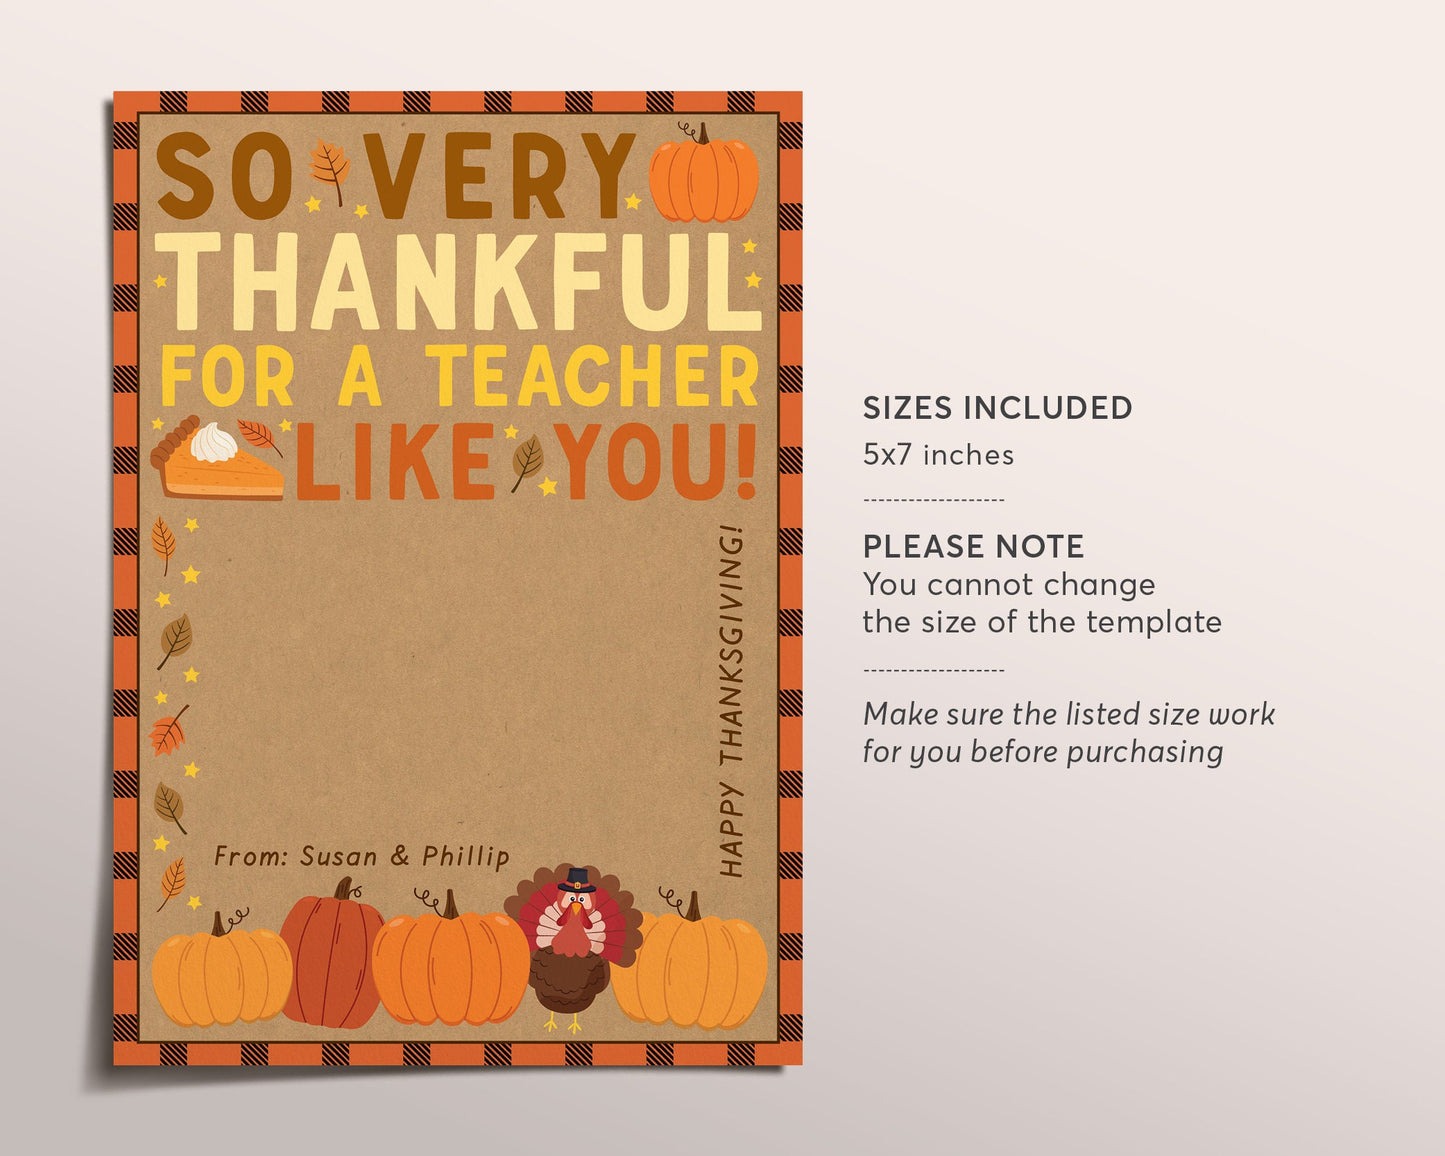 Thanksgiving Printable Gift Card Holder Editable Template, So Very Thankful For A Teacher Like You, Coach Coffee Card Holder Holiday Gift